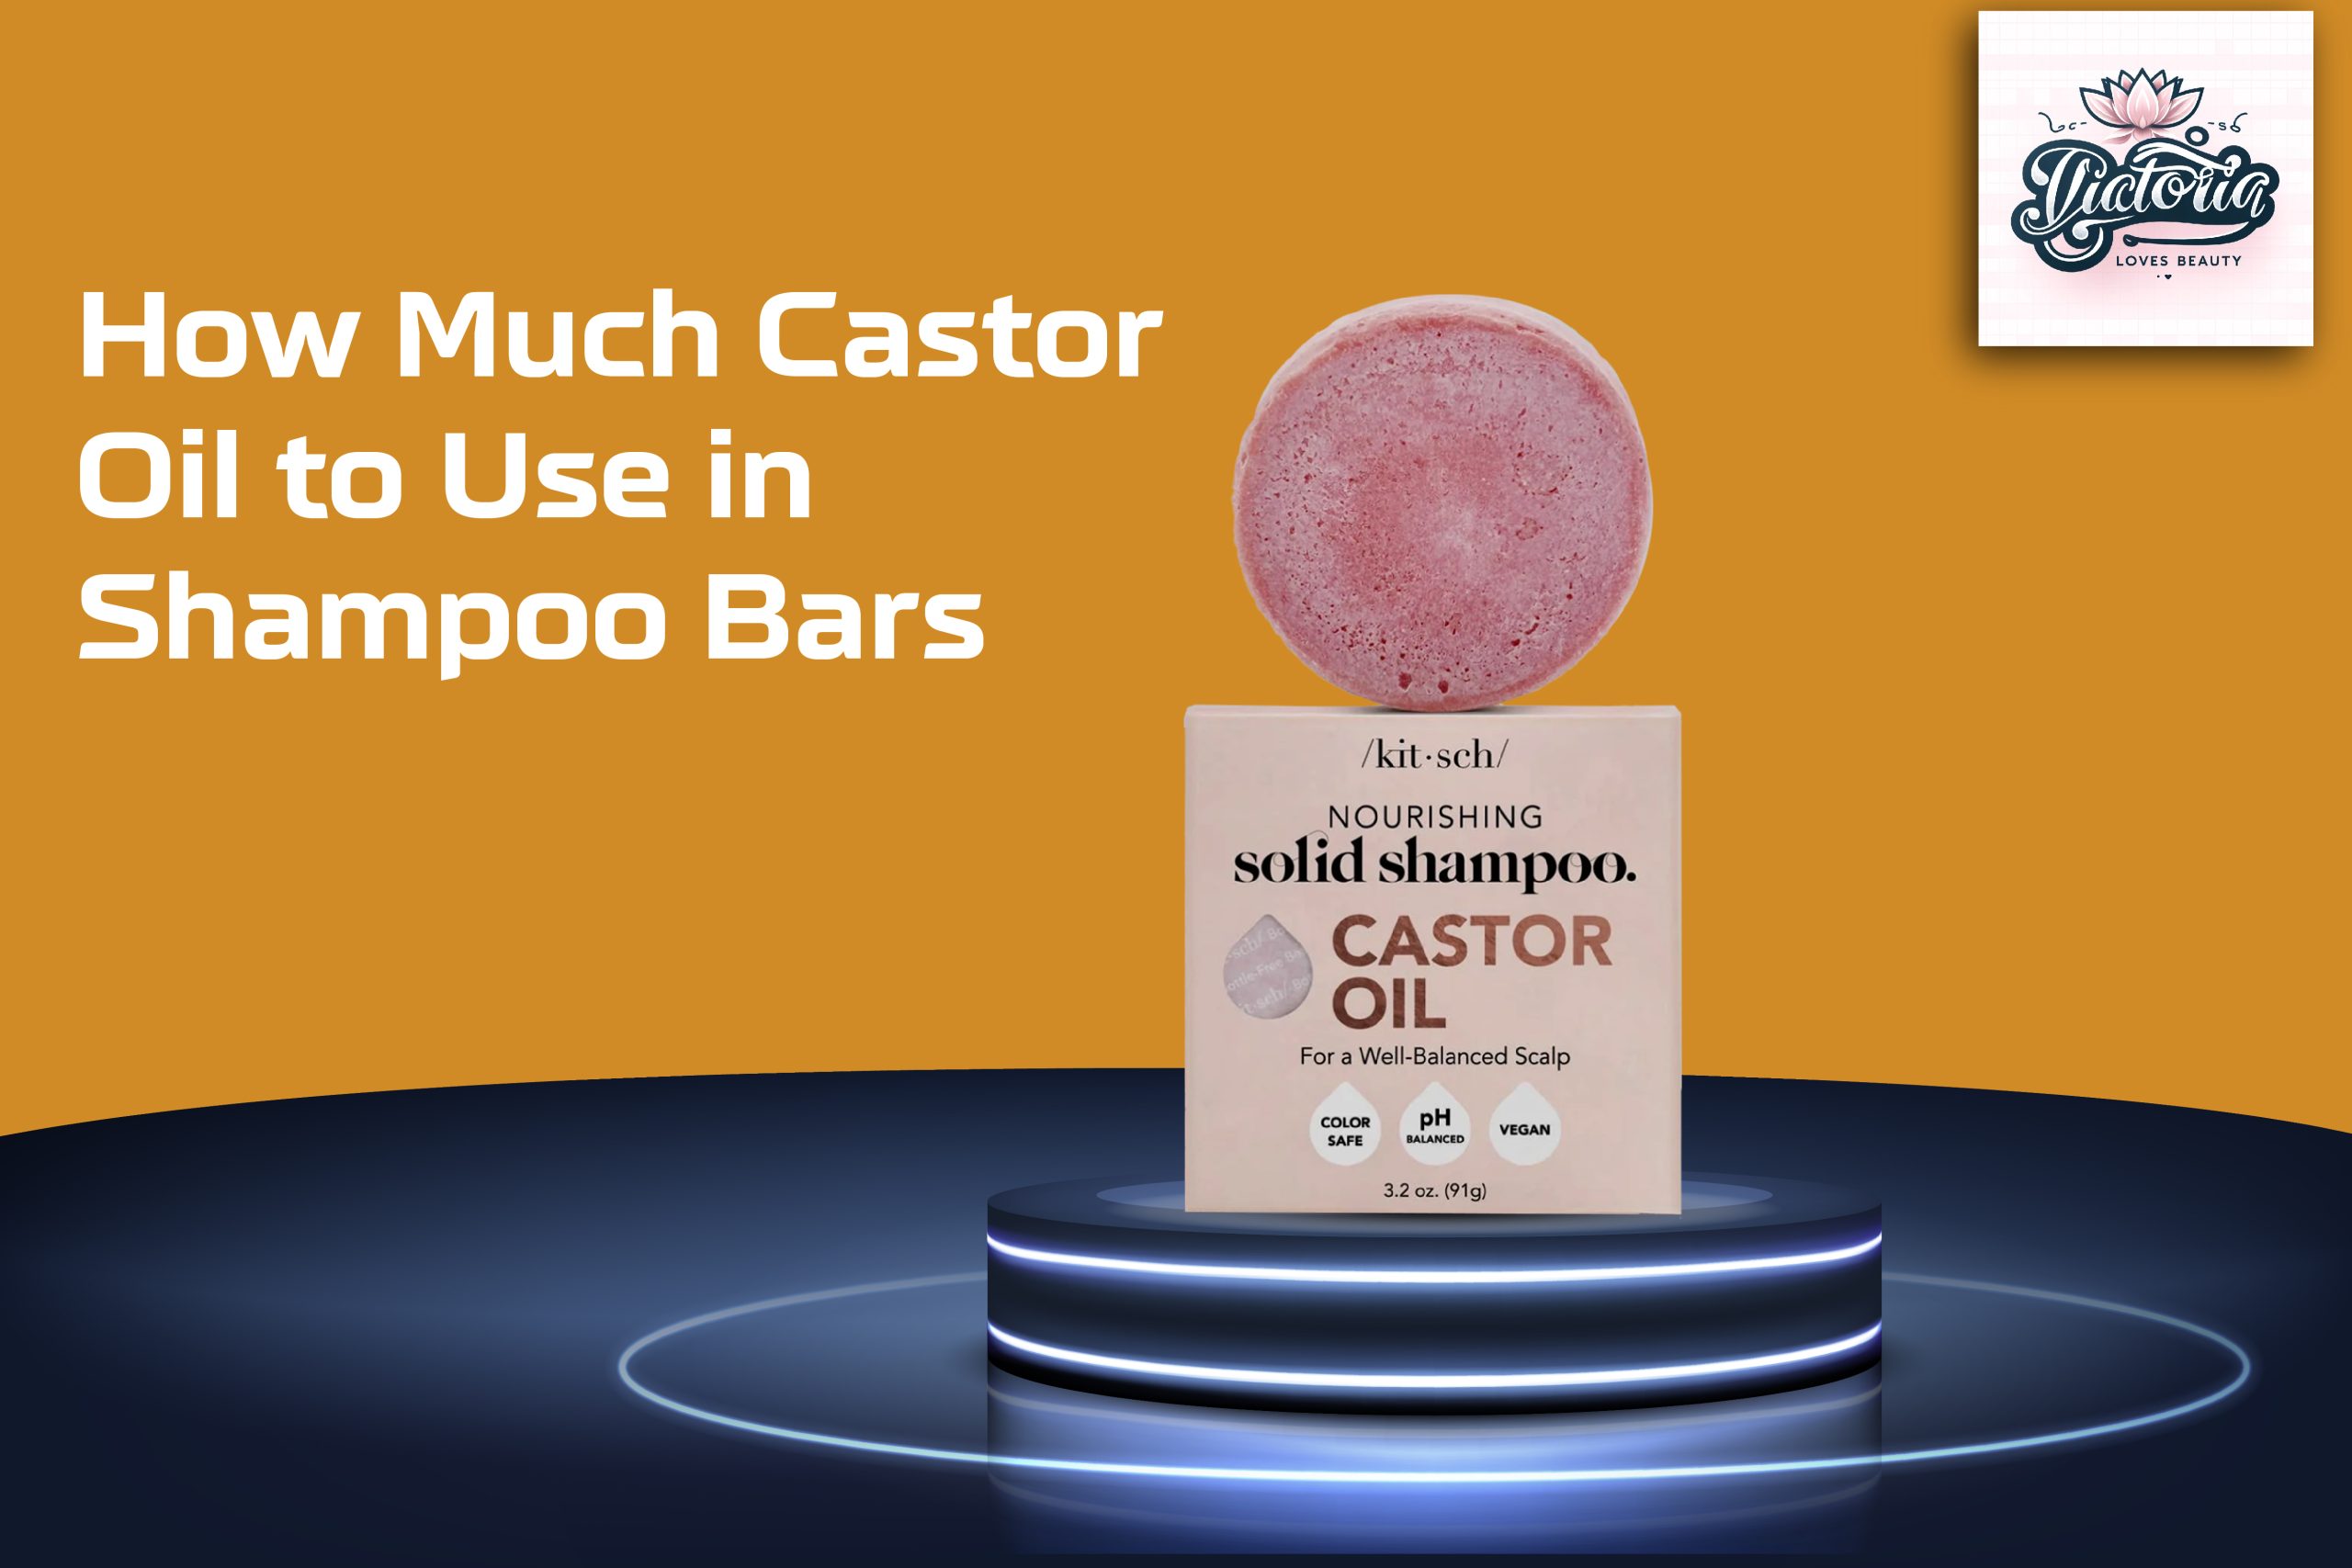 Castor Oil to Use in Shampoo Bars